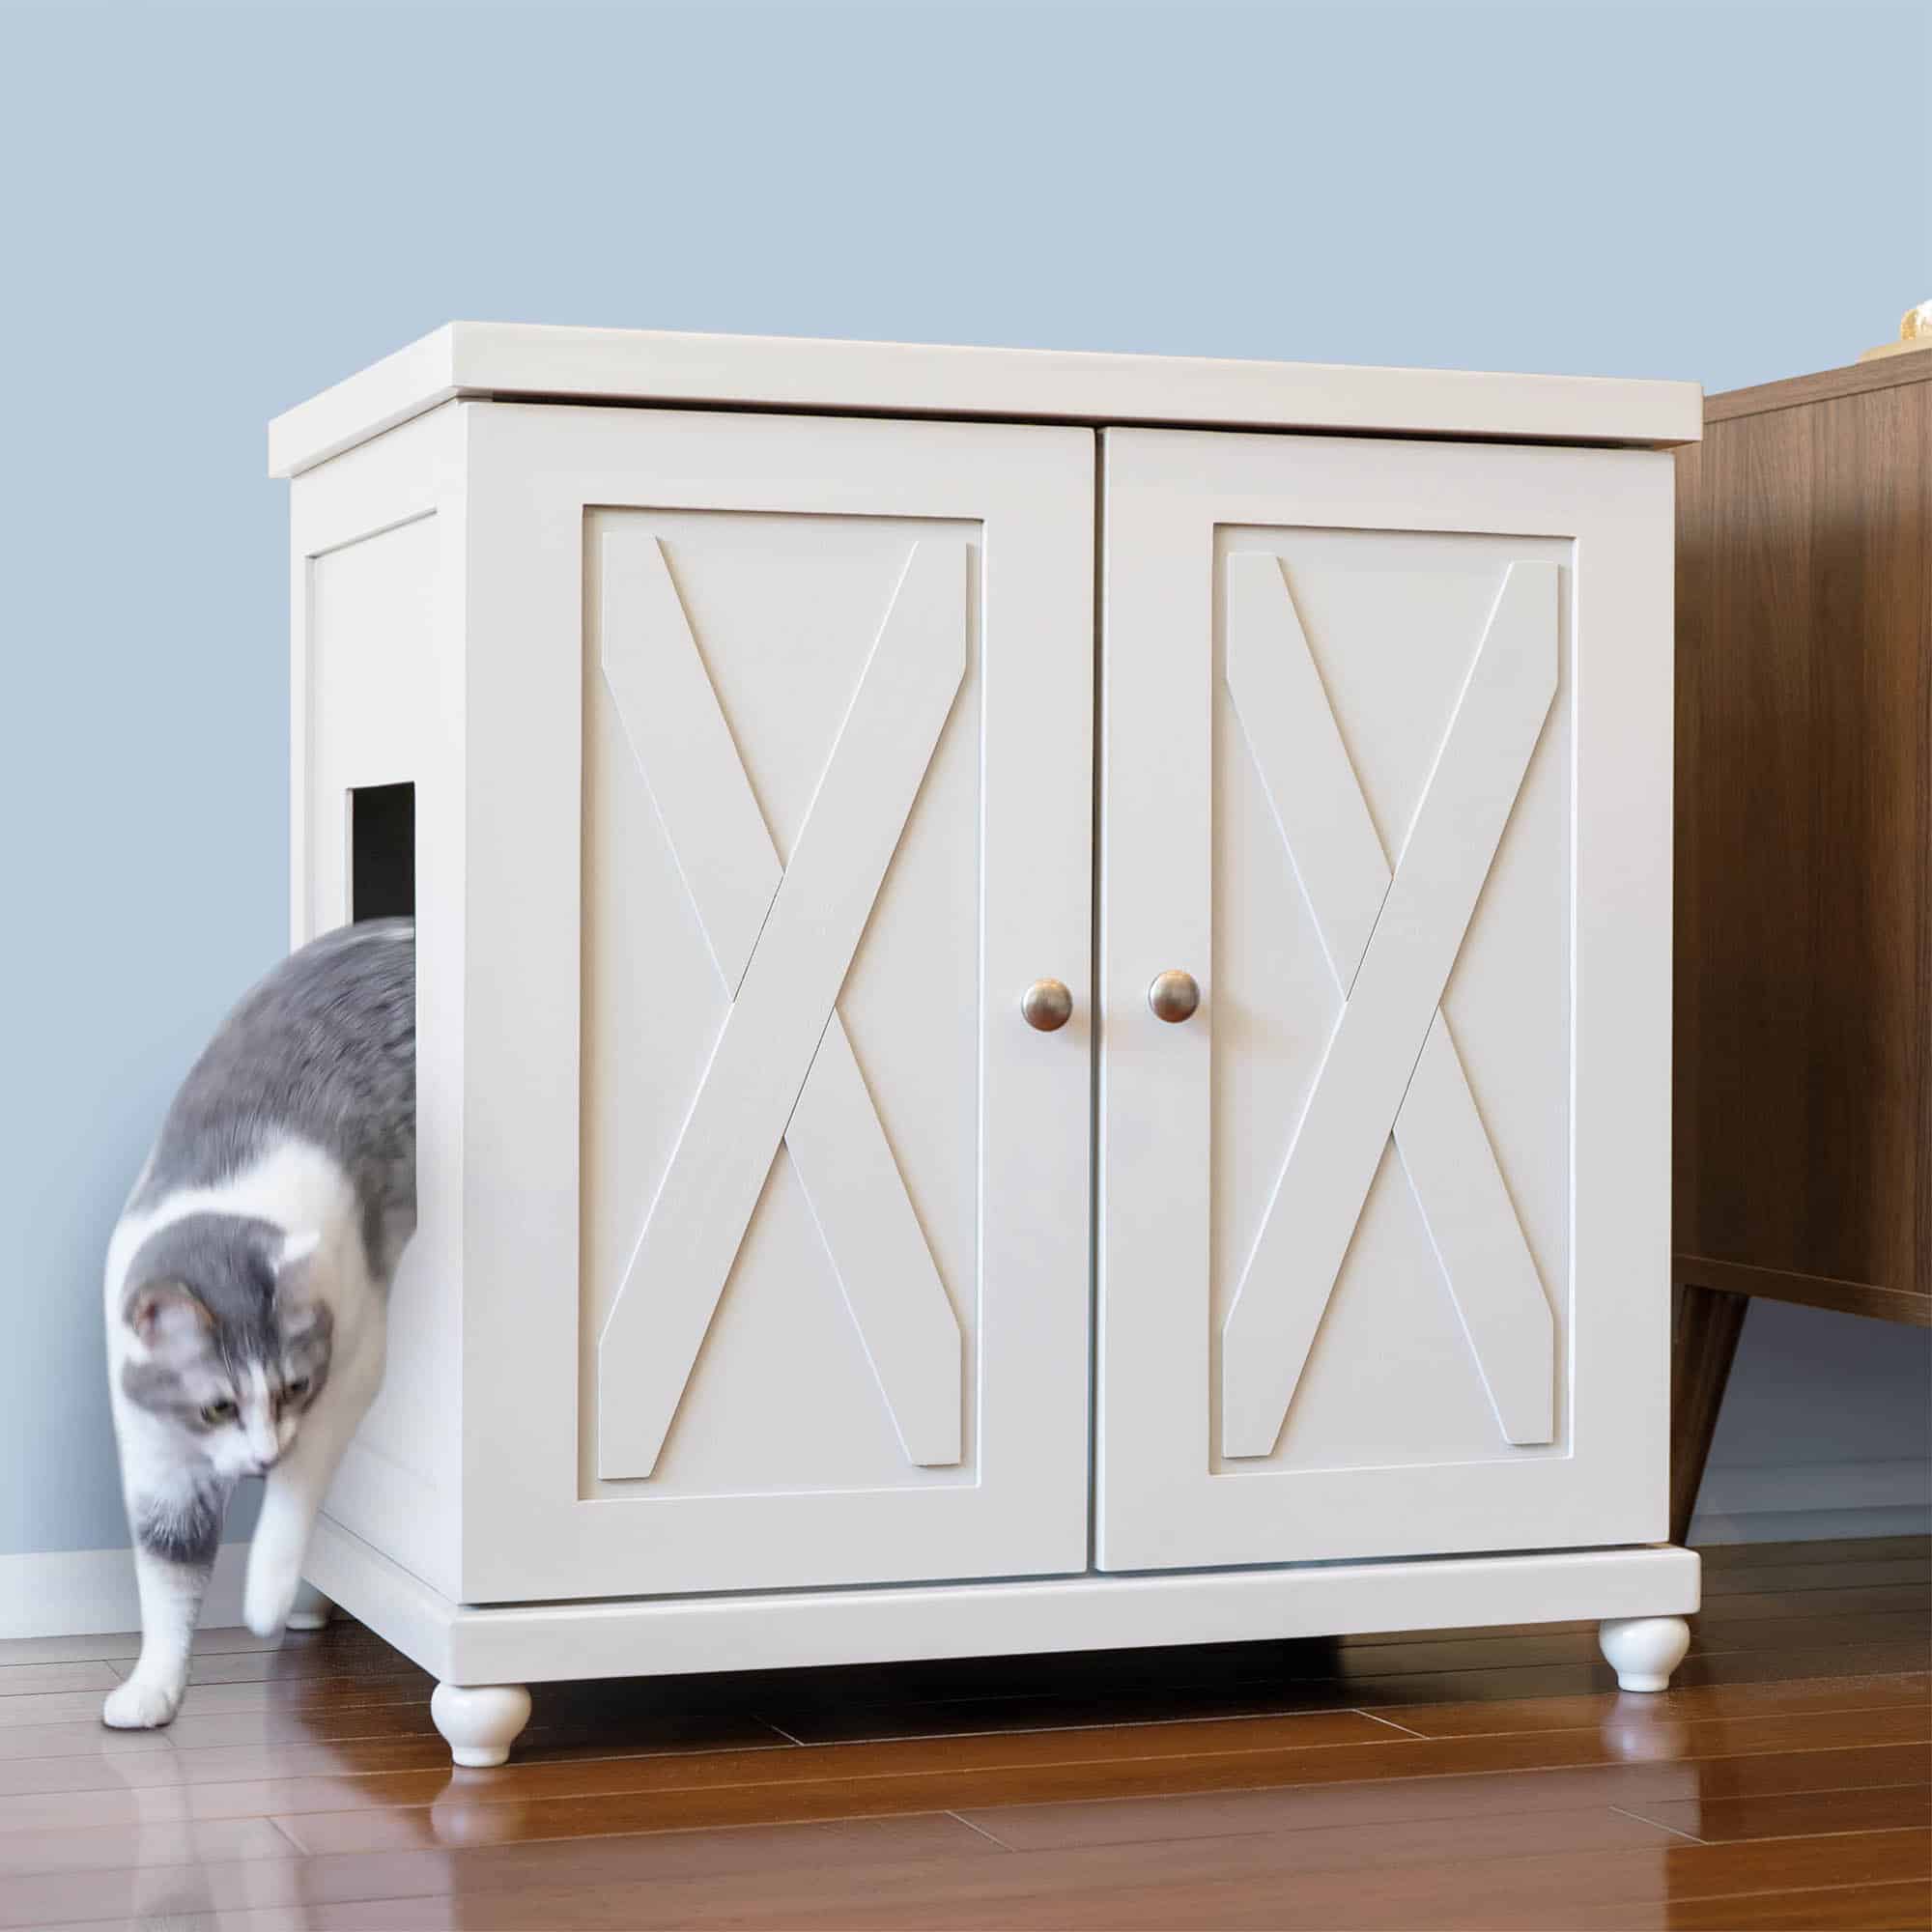 THE REFINED FELINE Cat Litter Box Enclosure Cabinet Farmhouse Style Hidden Litter Tray Cat Furniture XLarge Large Smoke Color 